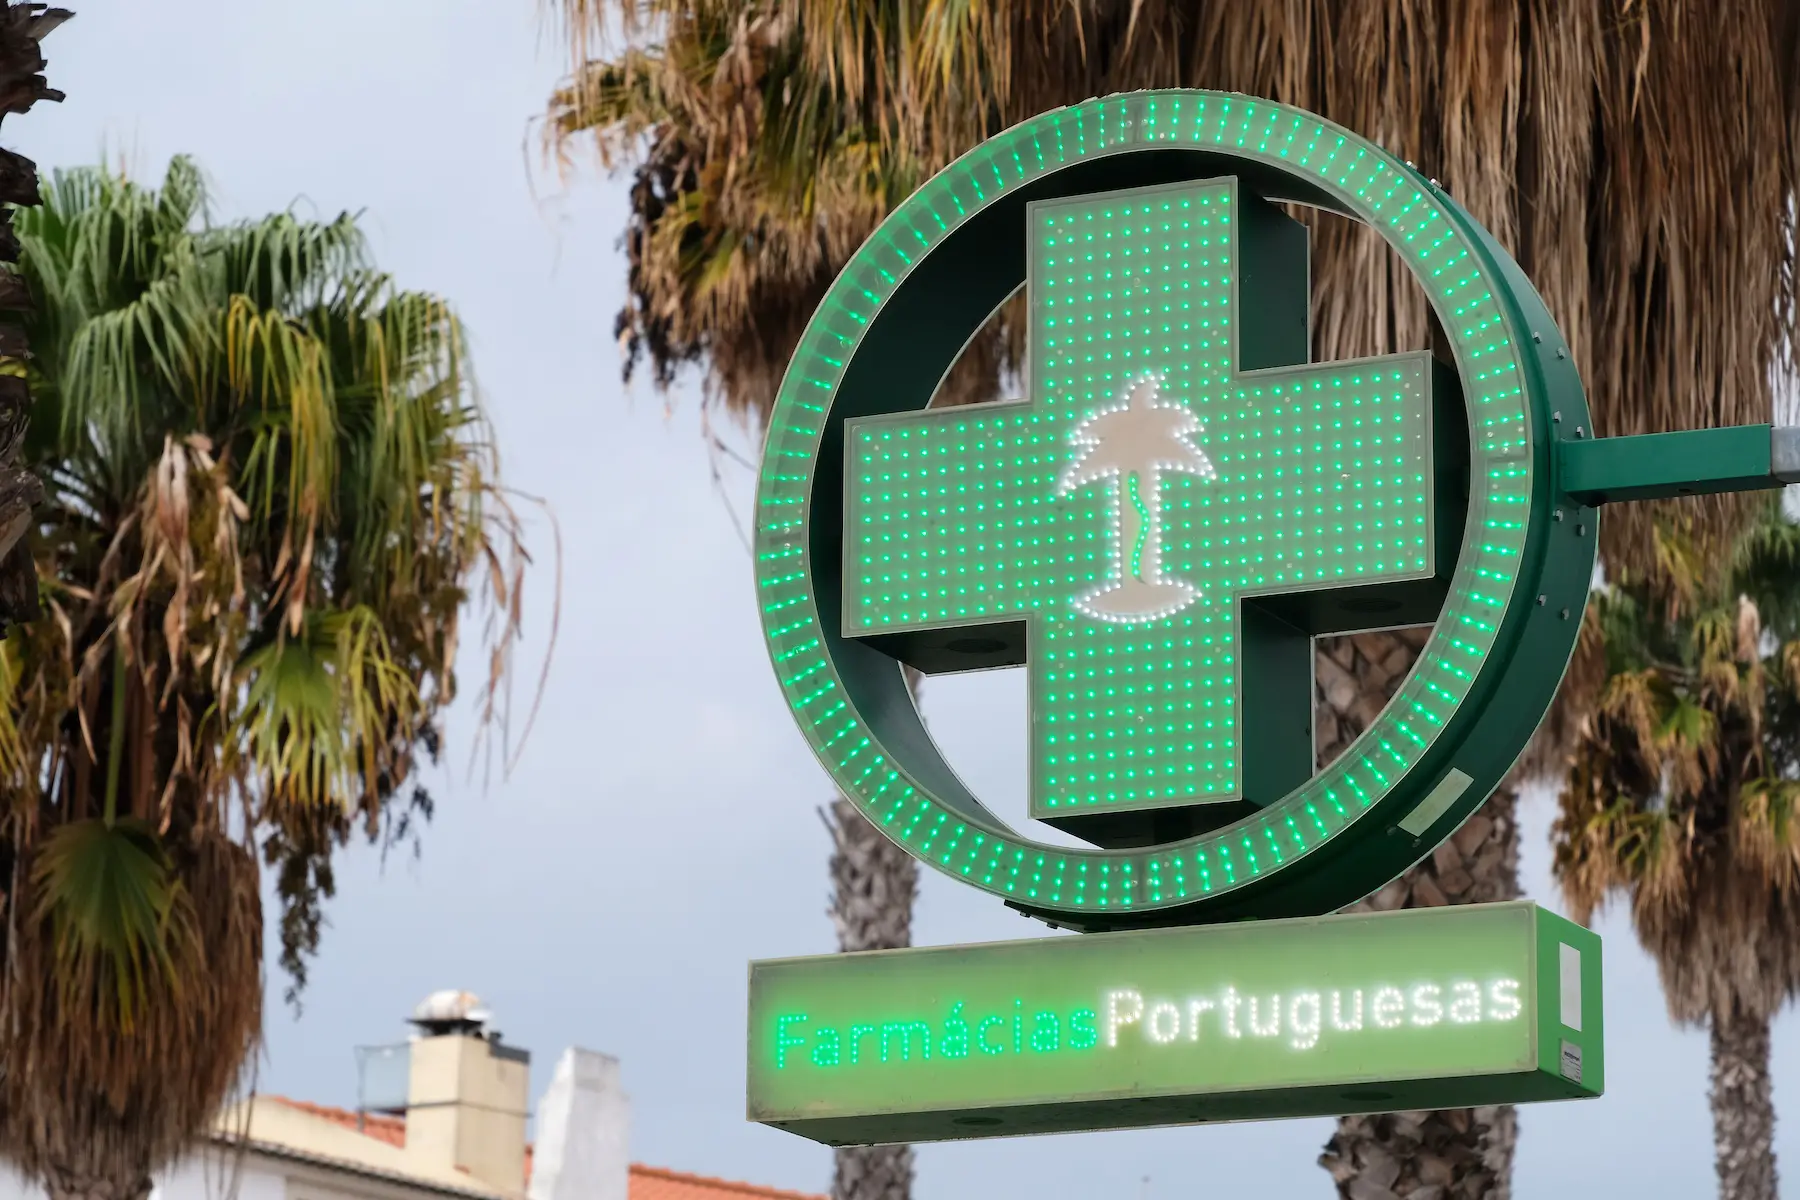 Bright green light up sign outside a Portuguese pharmacy with palm trees in the background